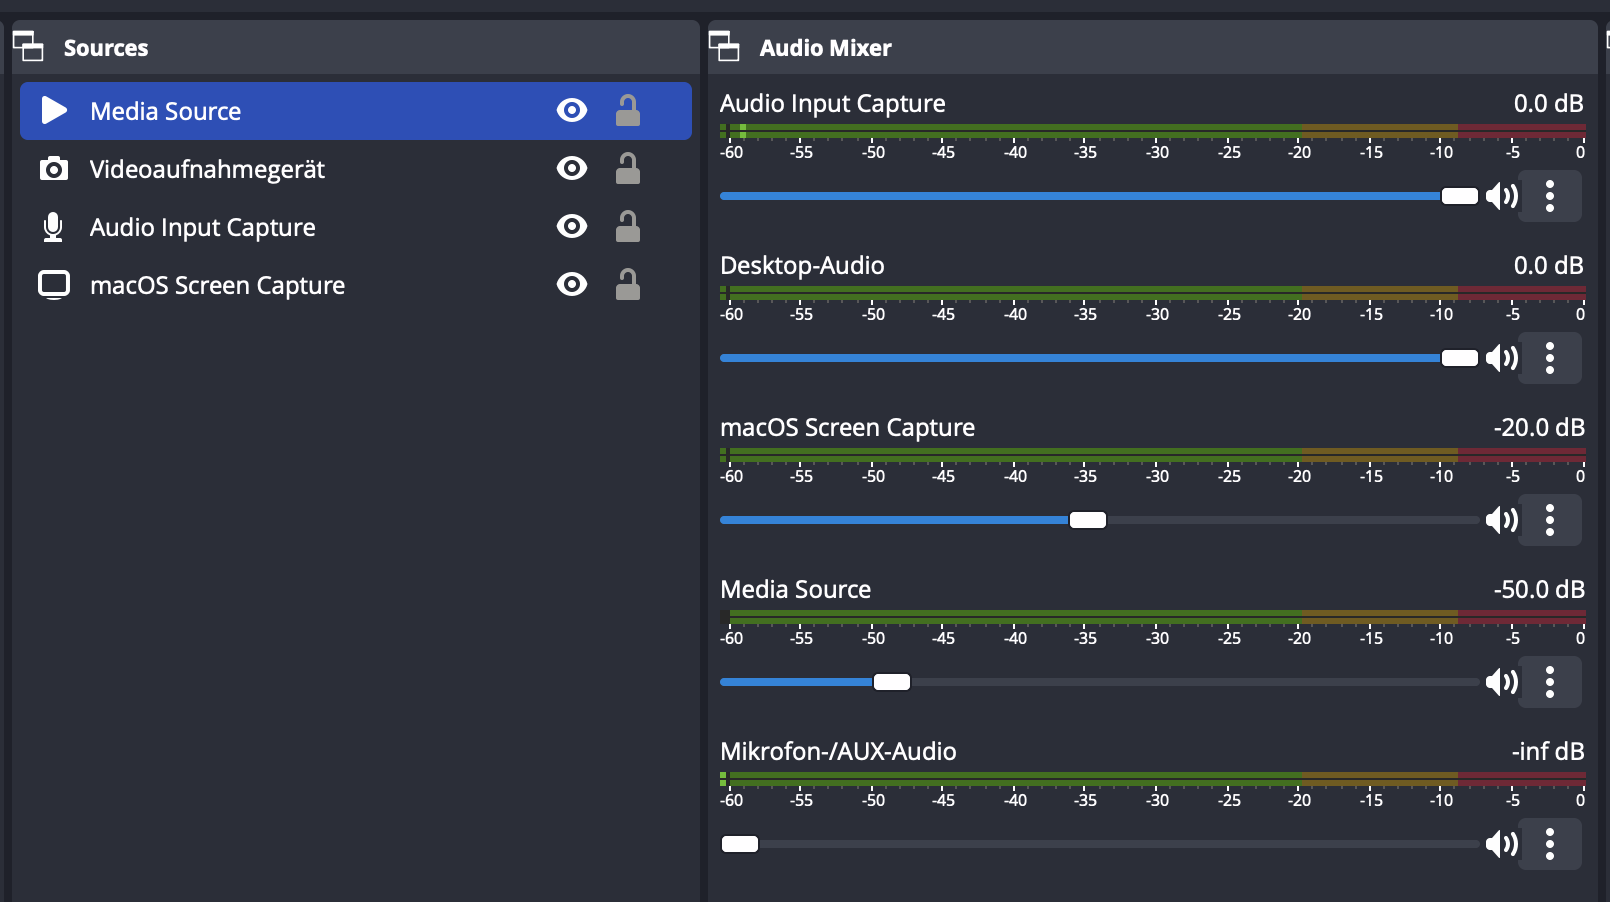 OBS Settings for Audio Mixer